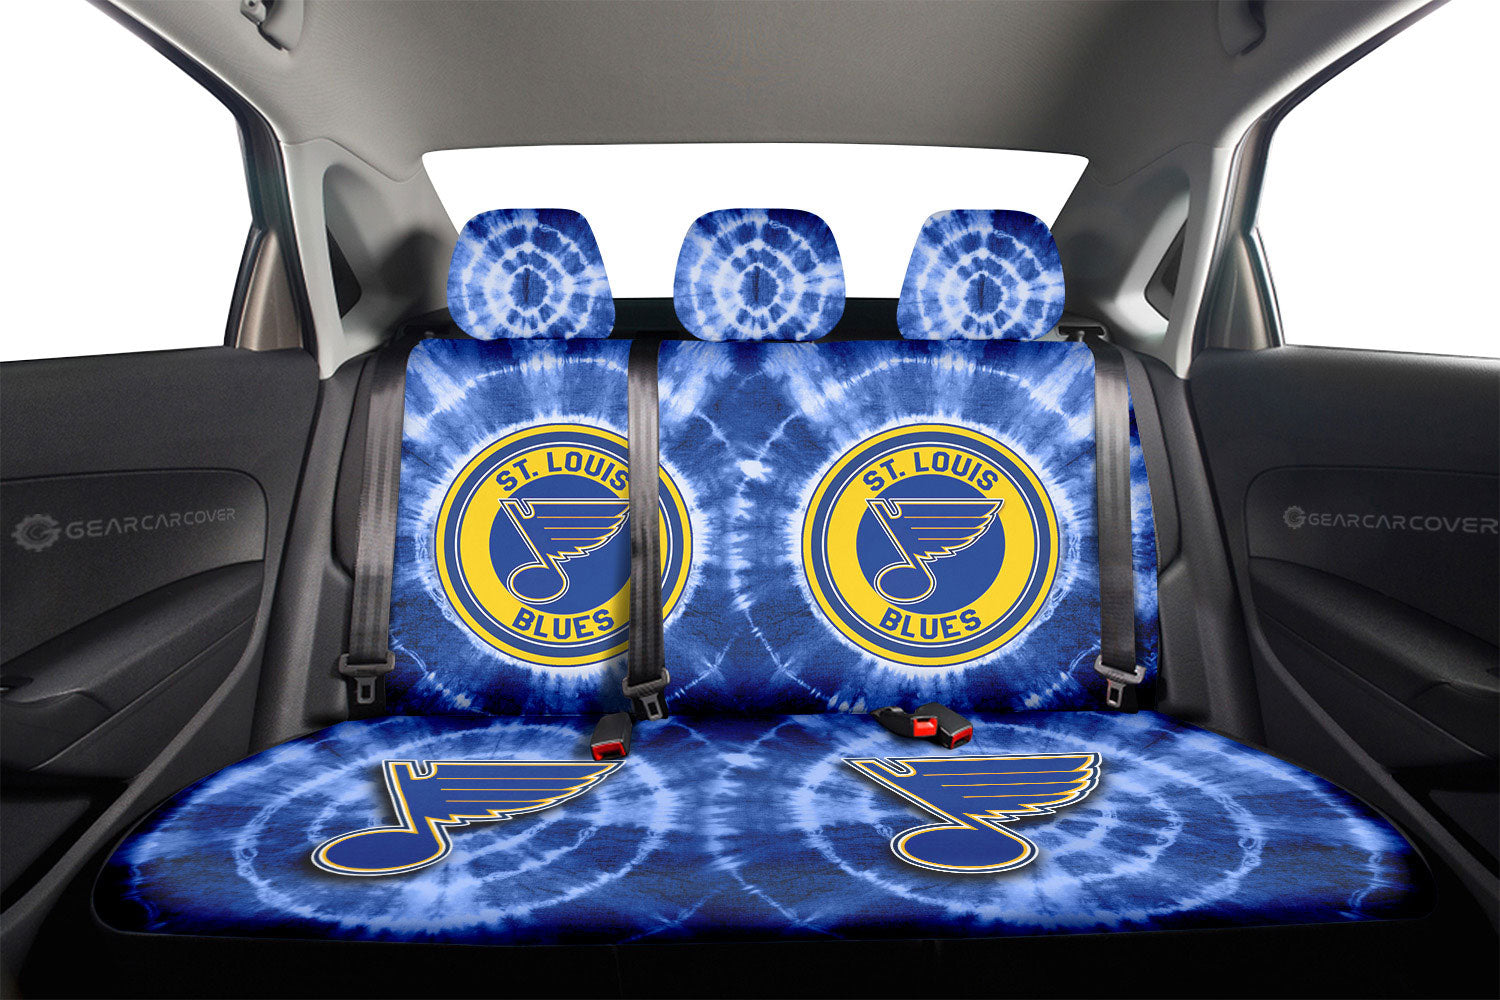 St Louis Blues Car Back Seat Covers Custom Tie Dye Car Accessories - Gearcarcover - 2